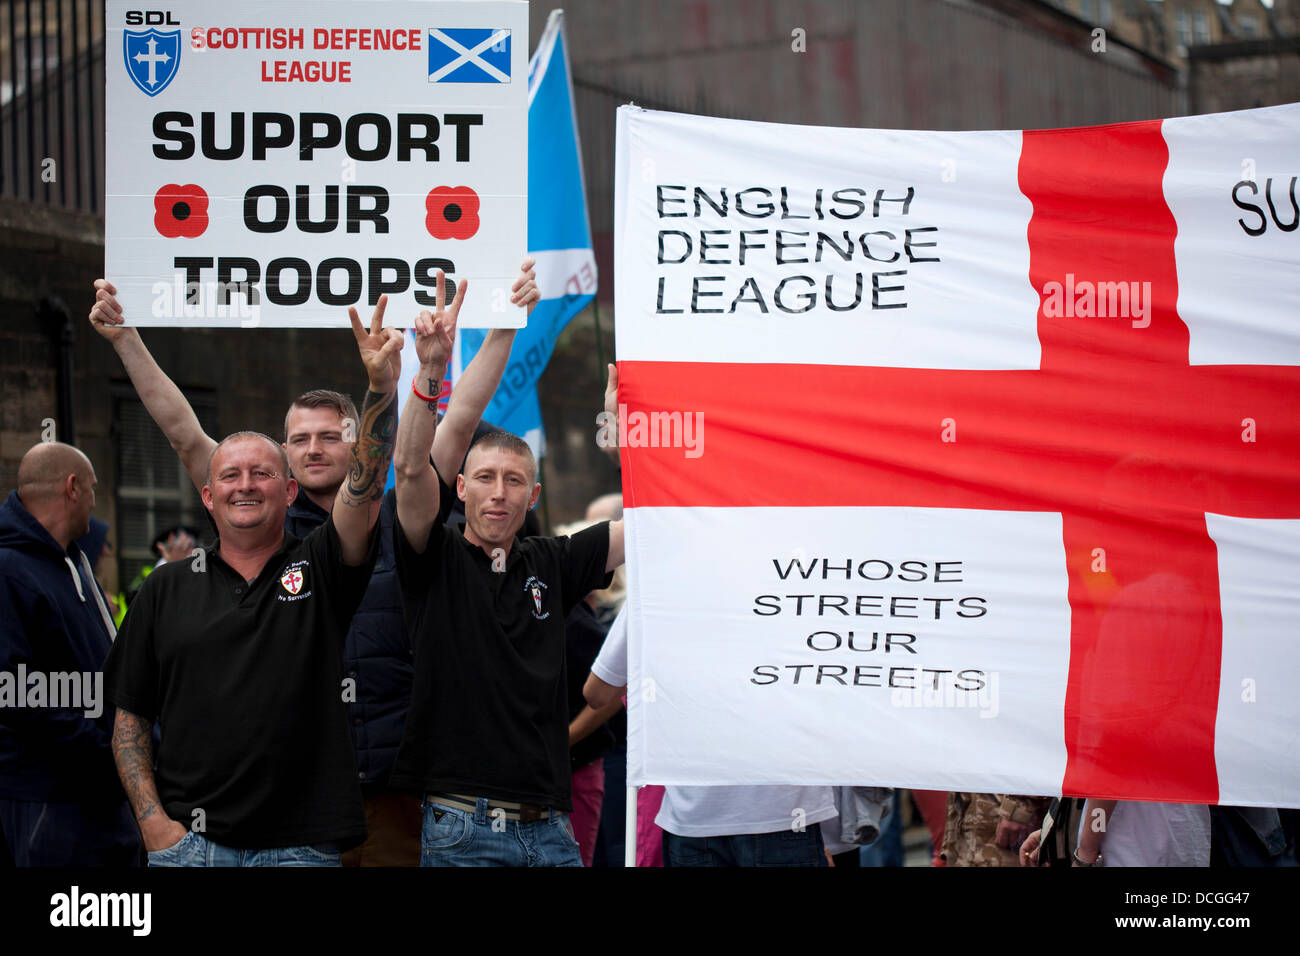 Edinburgh, Scotland 17th August 2013, The Scottish Defence League (SDL) and their supporters marched down  the city's Royal Mile to the  Parliament. Stock Photo